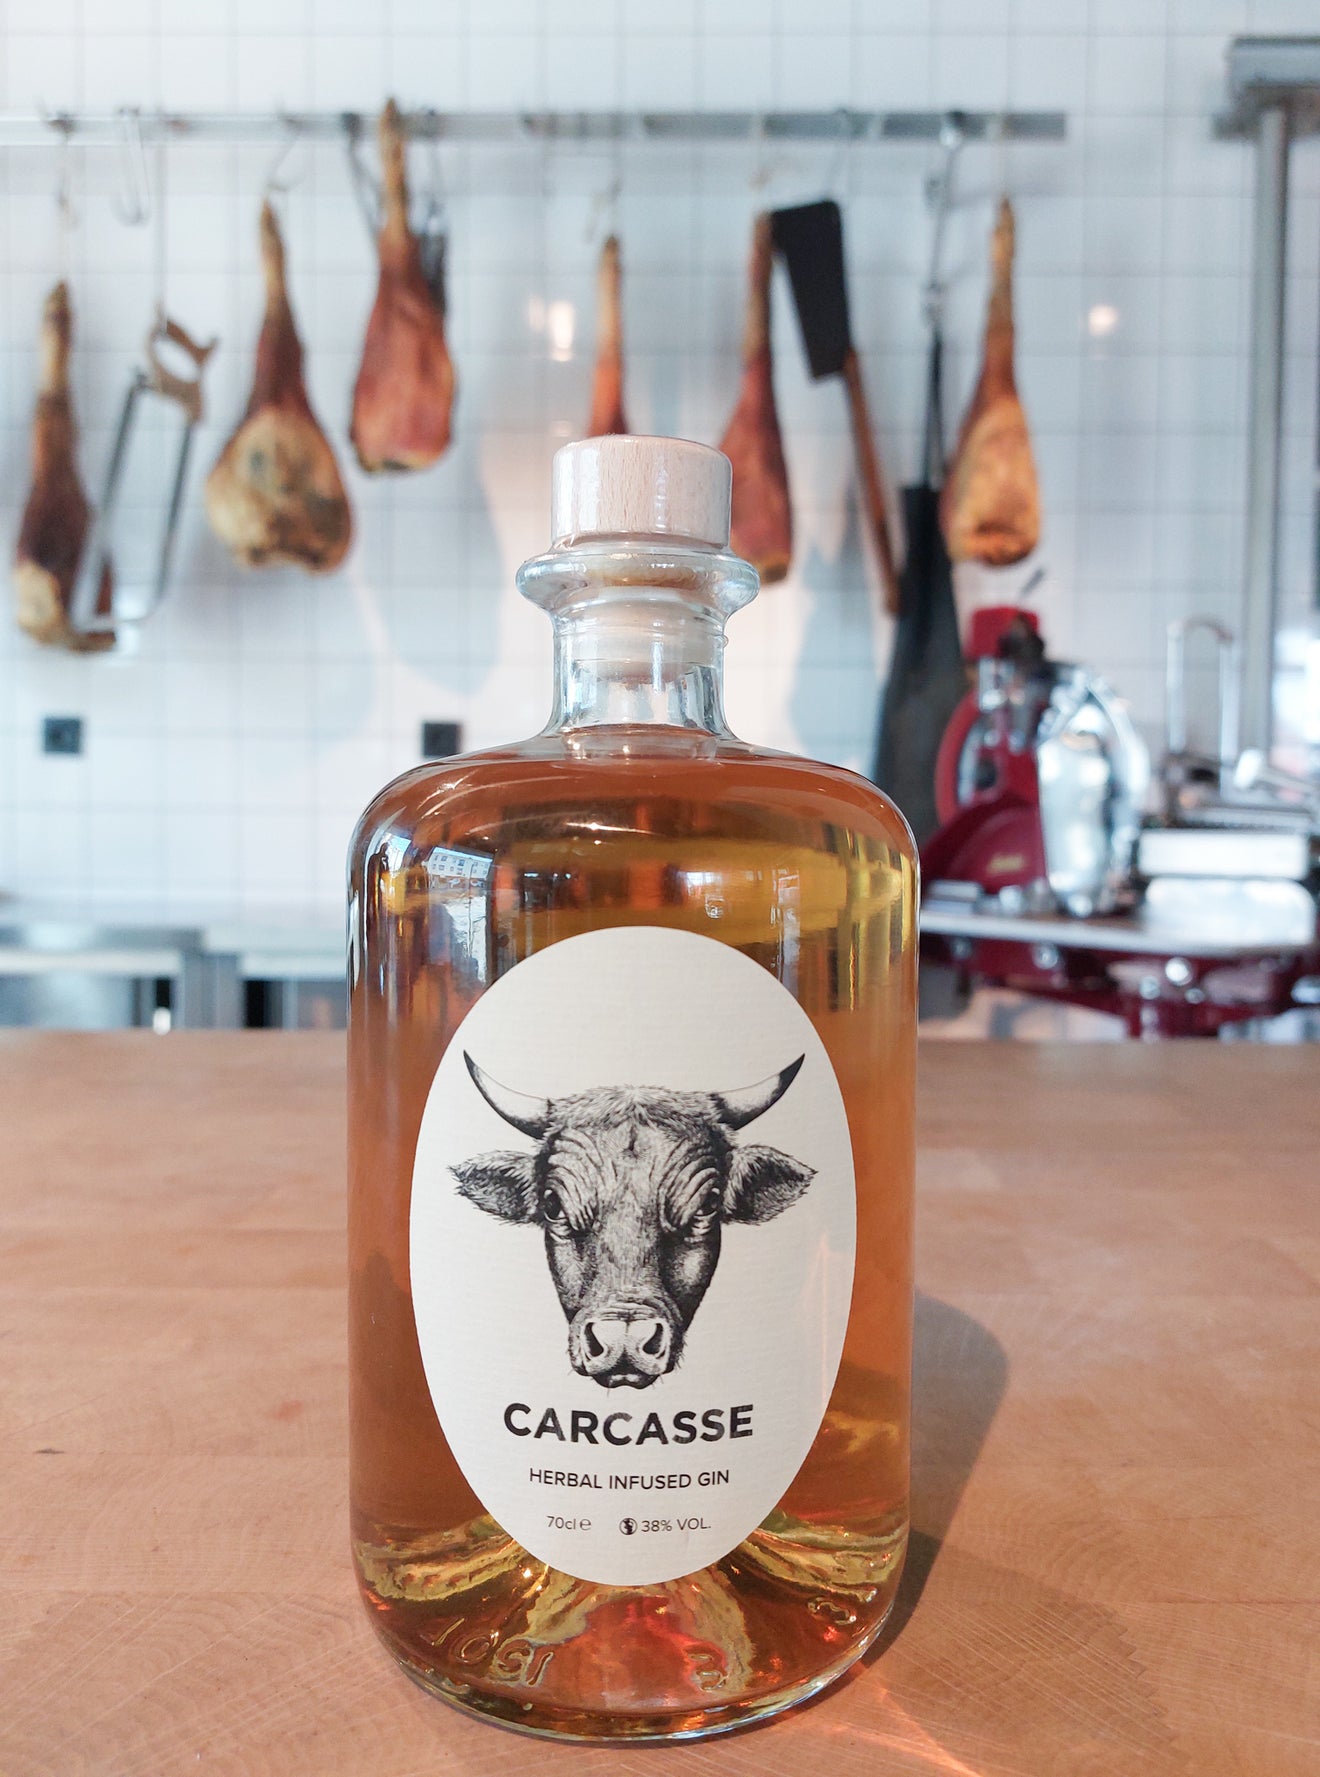 Carcasse Herbal Infused Gin